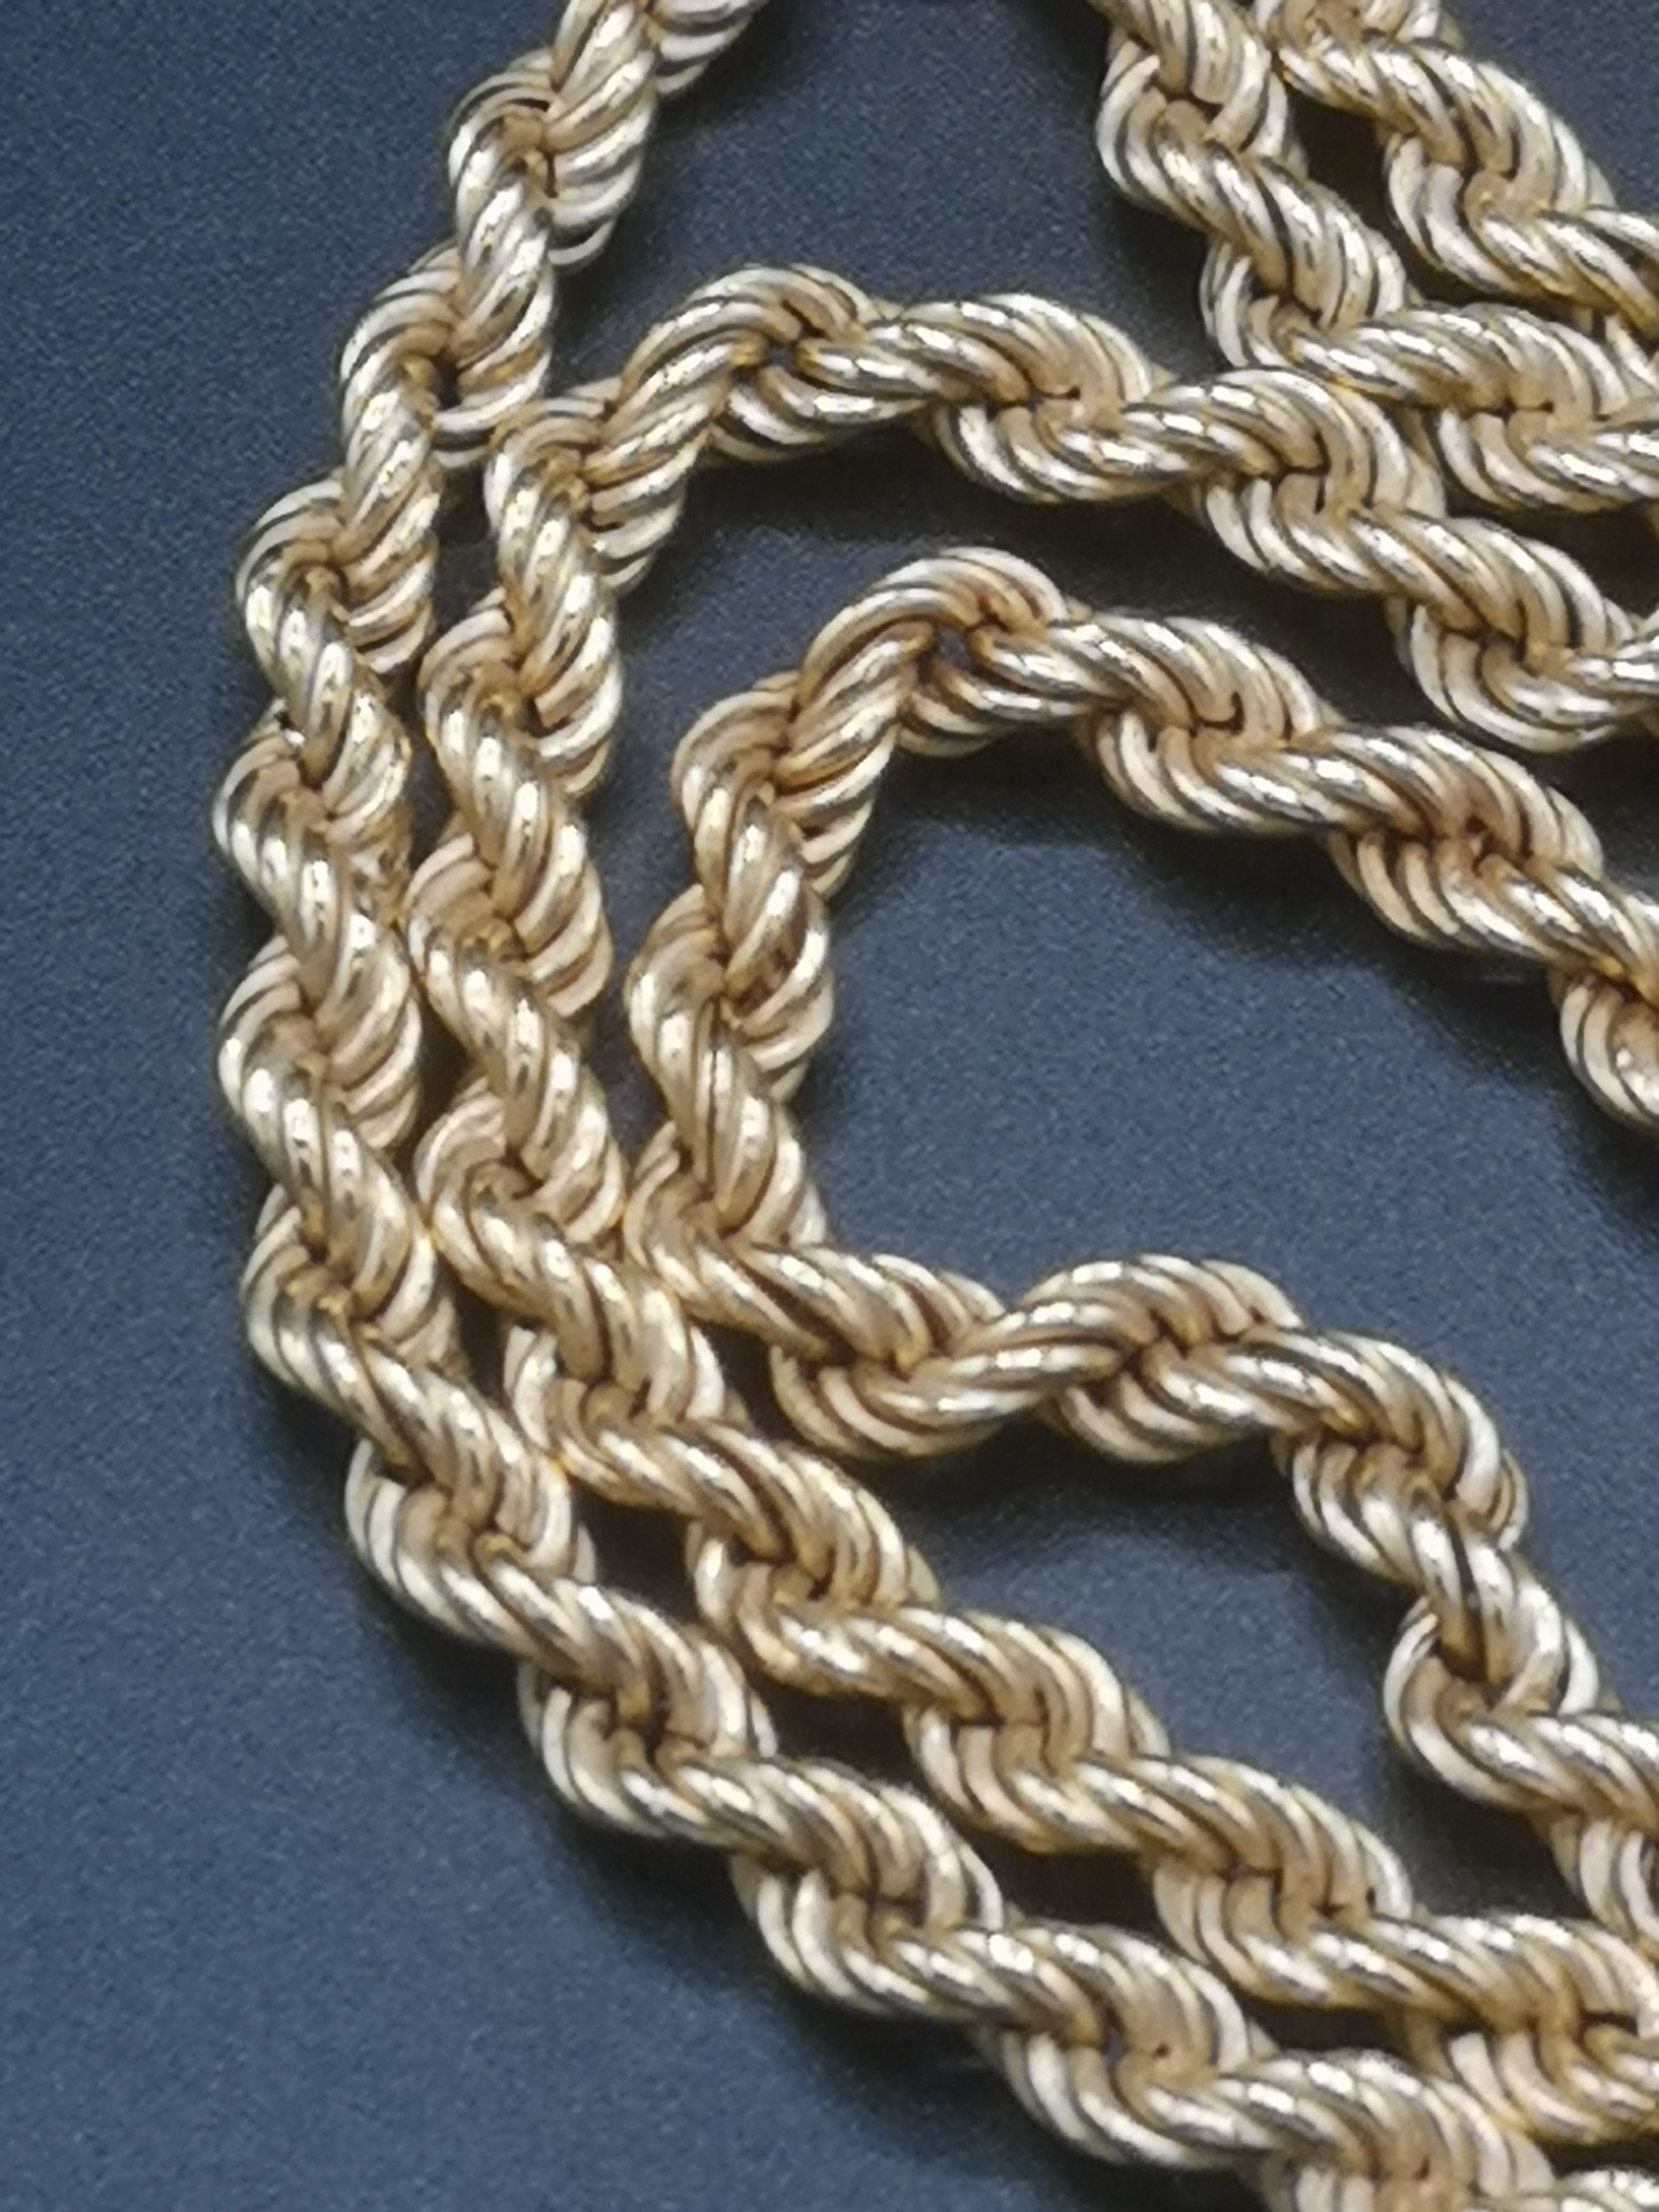 18ct gold rope twist necklace - Image 6 of 6